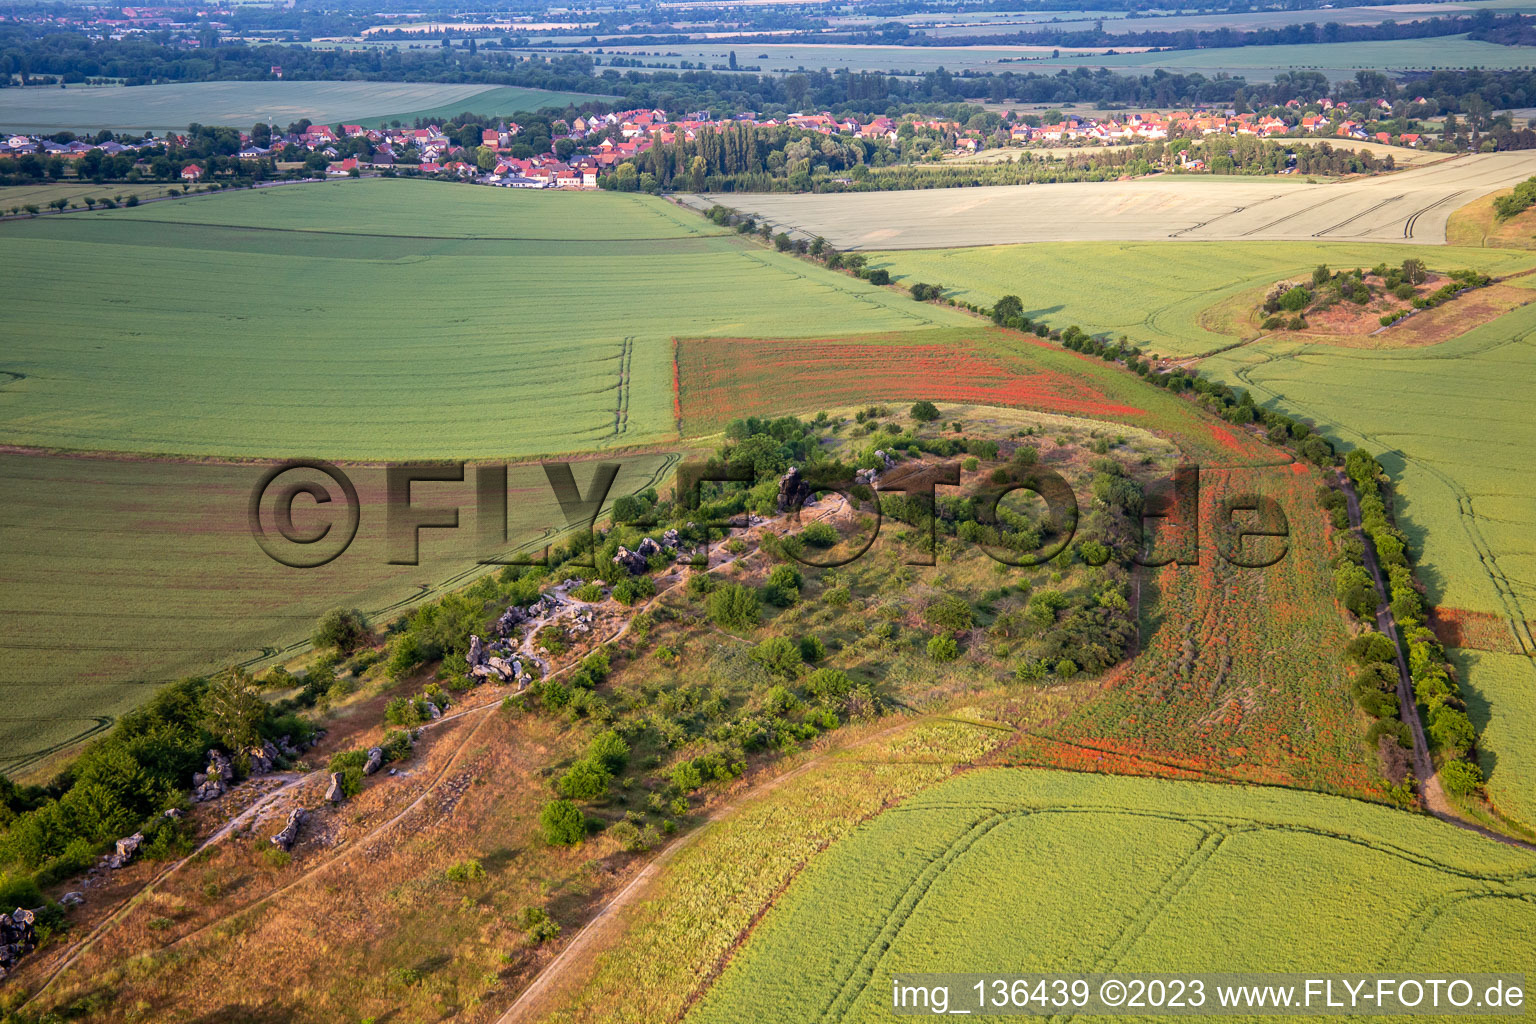 Warnstedt Devil's Wall in Thale in the state Saxony-Anhalt, Germany seen from above